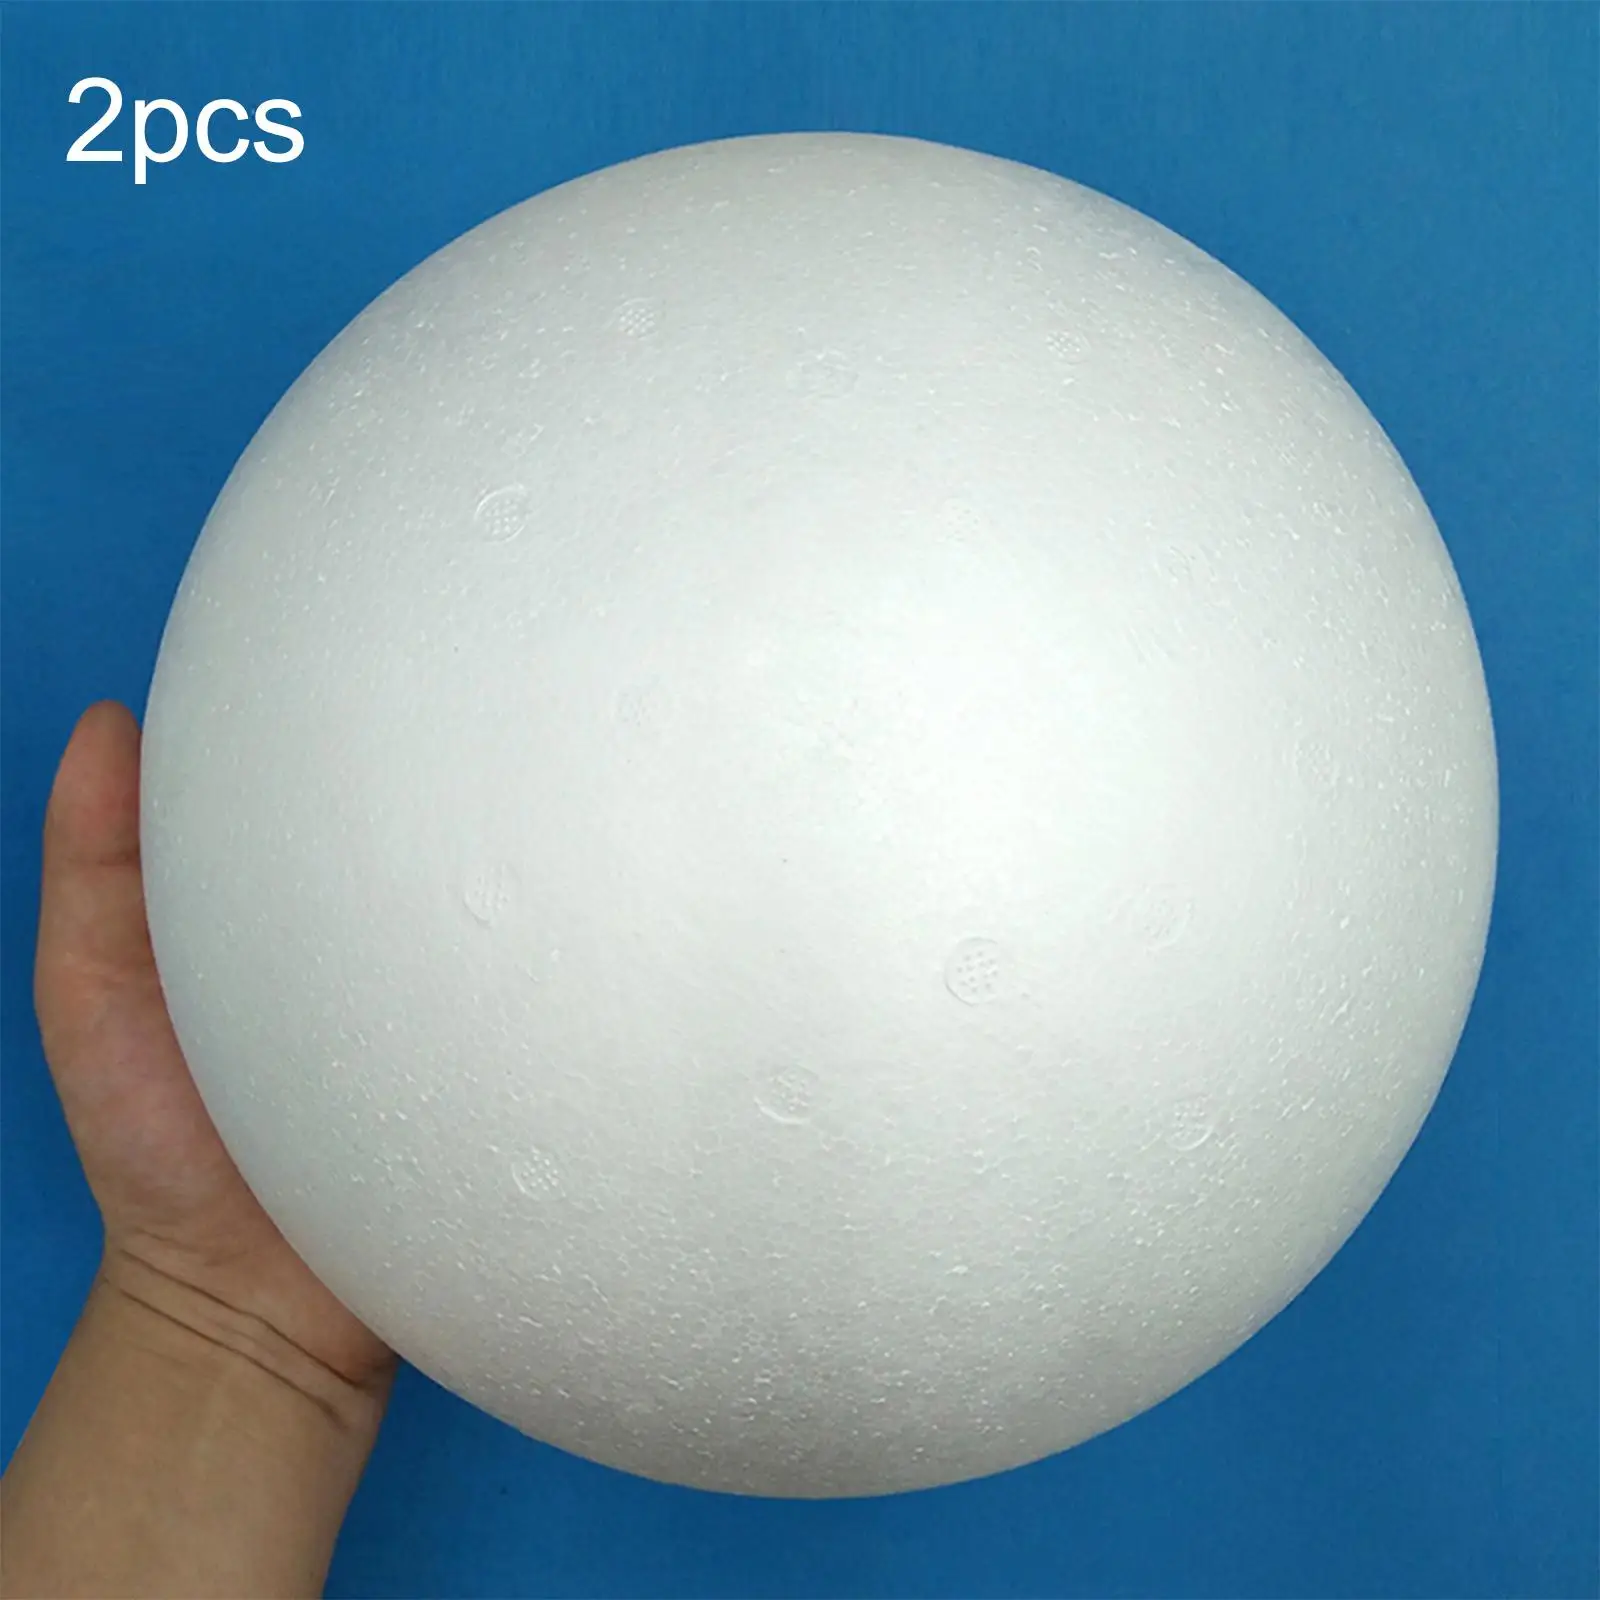 2Pcs Foam Ball Half Round School Supplies Kids Gifts Mini Toys for DIY Crafts Modeling Science Projects Decor Thanksgiving Party